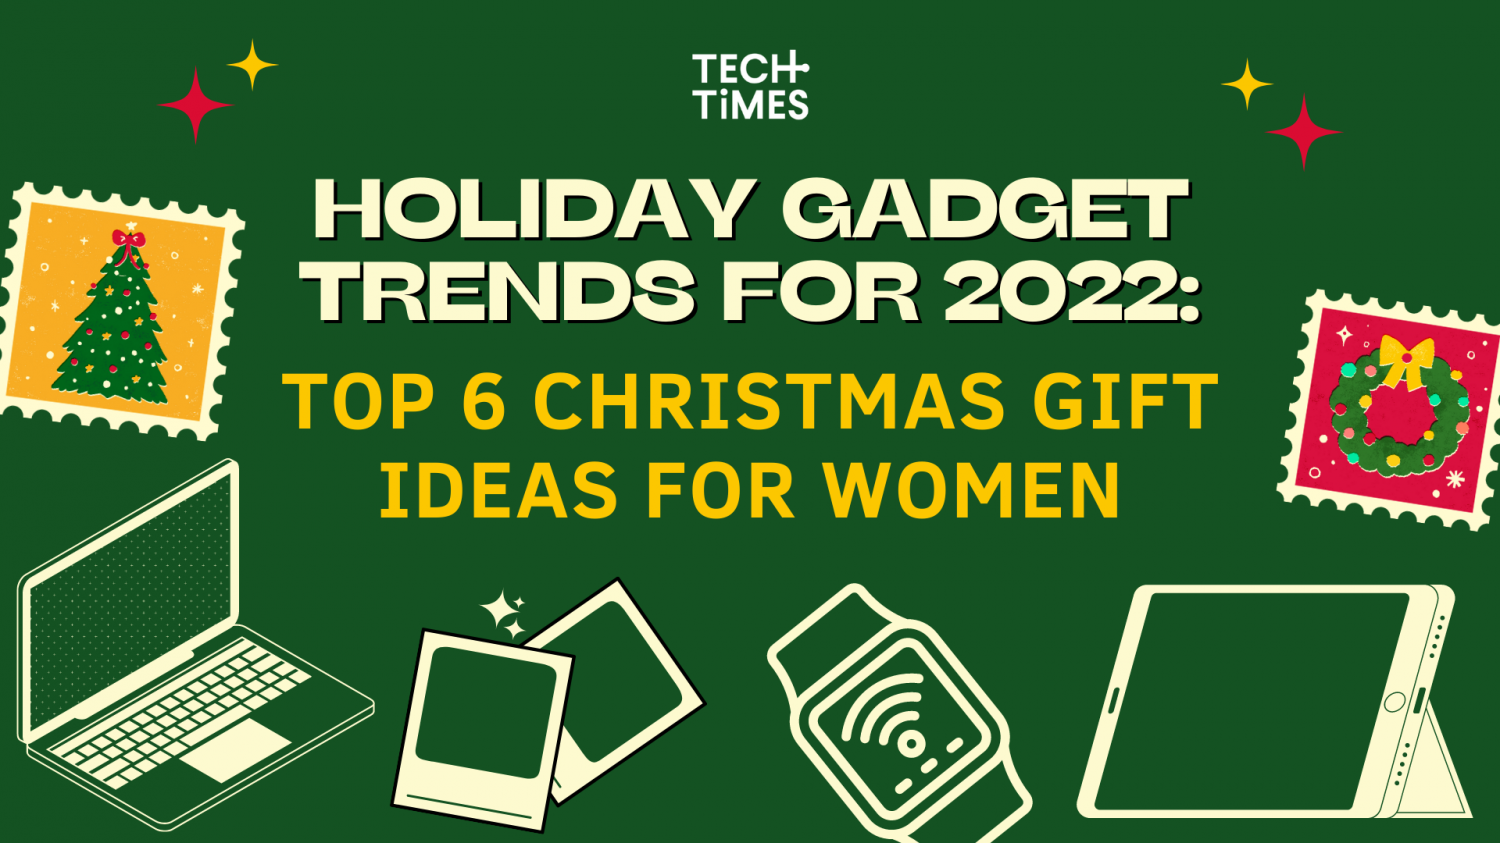 Holiday Gadget Trends For 2022: Top 6 Christmas Gift Ideas for Women